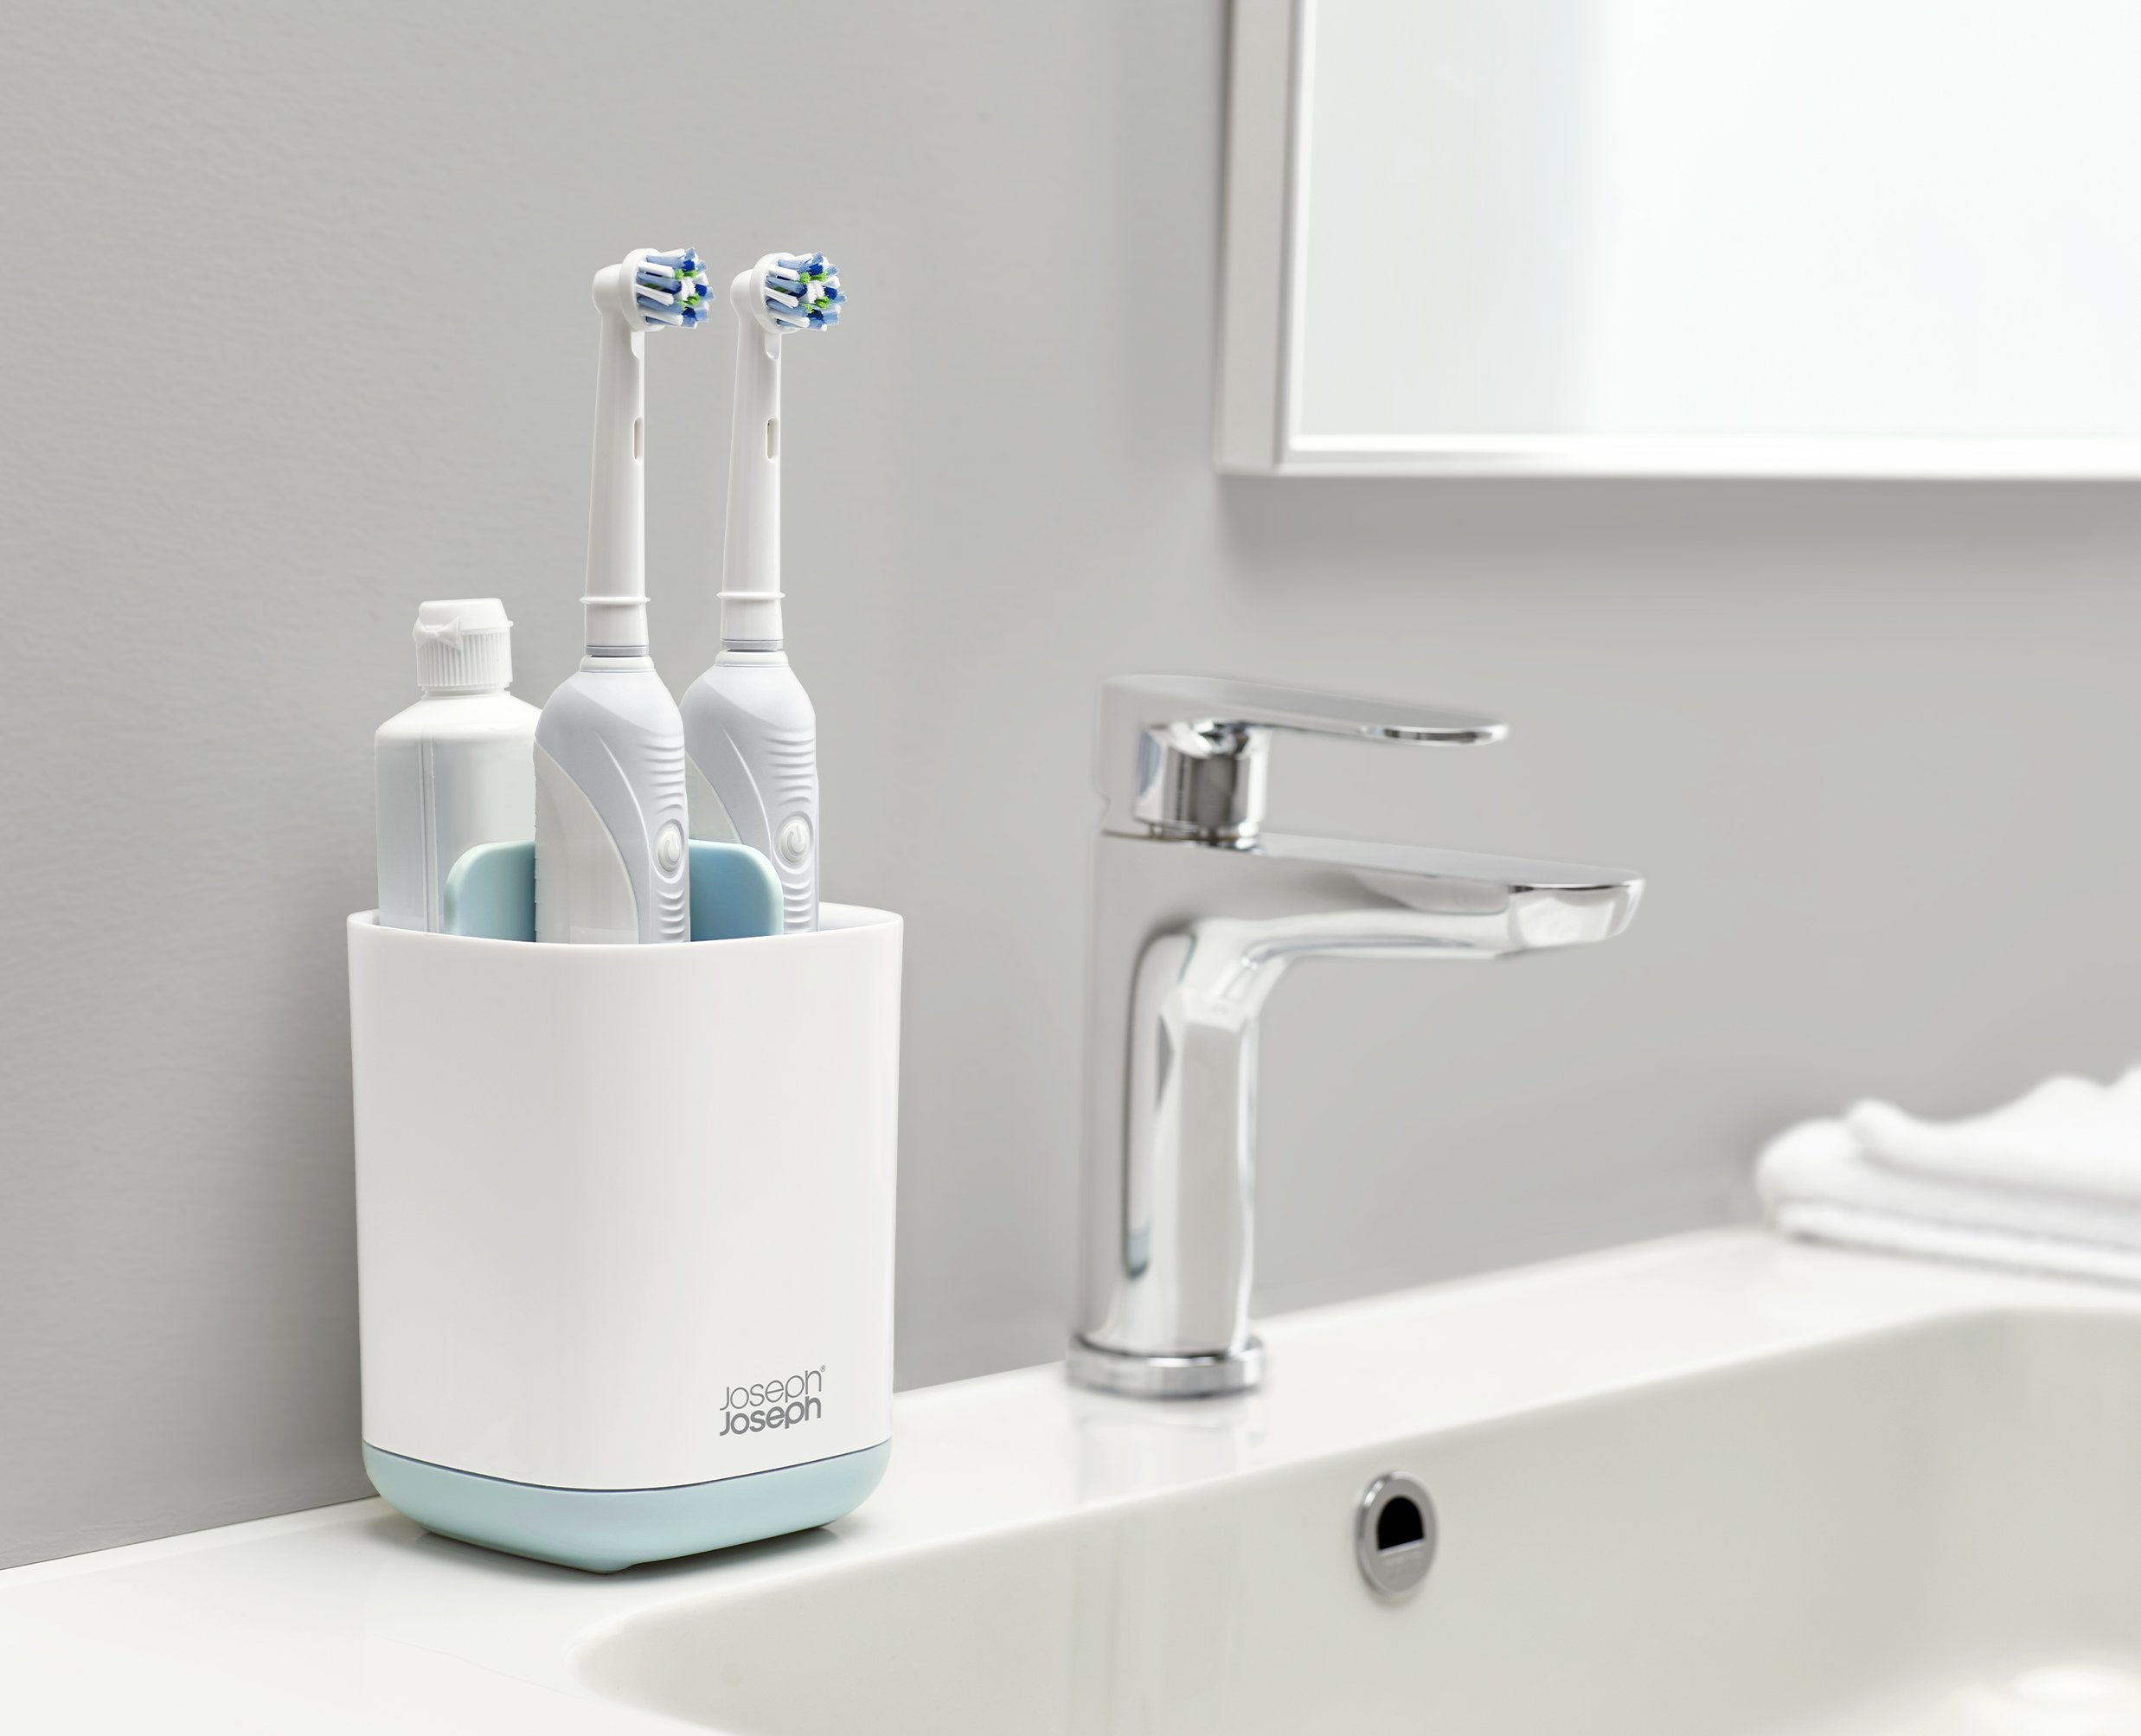 BEON.COM.AU  These toothbrush caddies have different sections for organising a variety of oral care items such as manual or electric toothbrushes and toothpaste tubes.  Versatile storage Ideal for electric or battery toothbrushes and toothpaste tubes Dismantles for easy cleaning Ventilated for quick drying N... Joseph Joseph at BEON.COM.AU